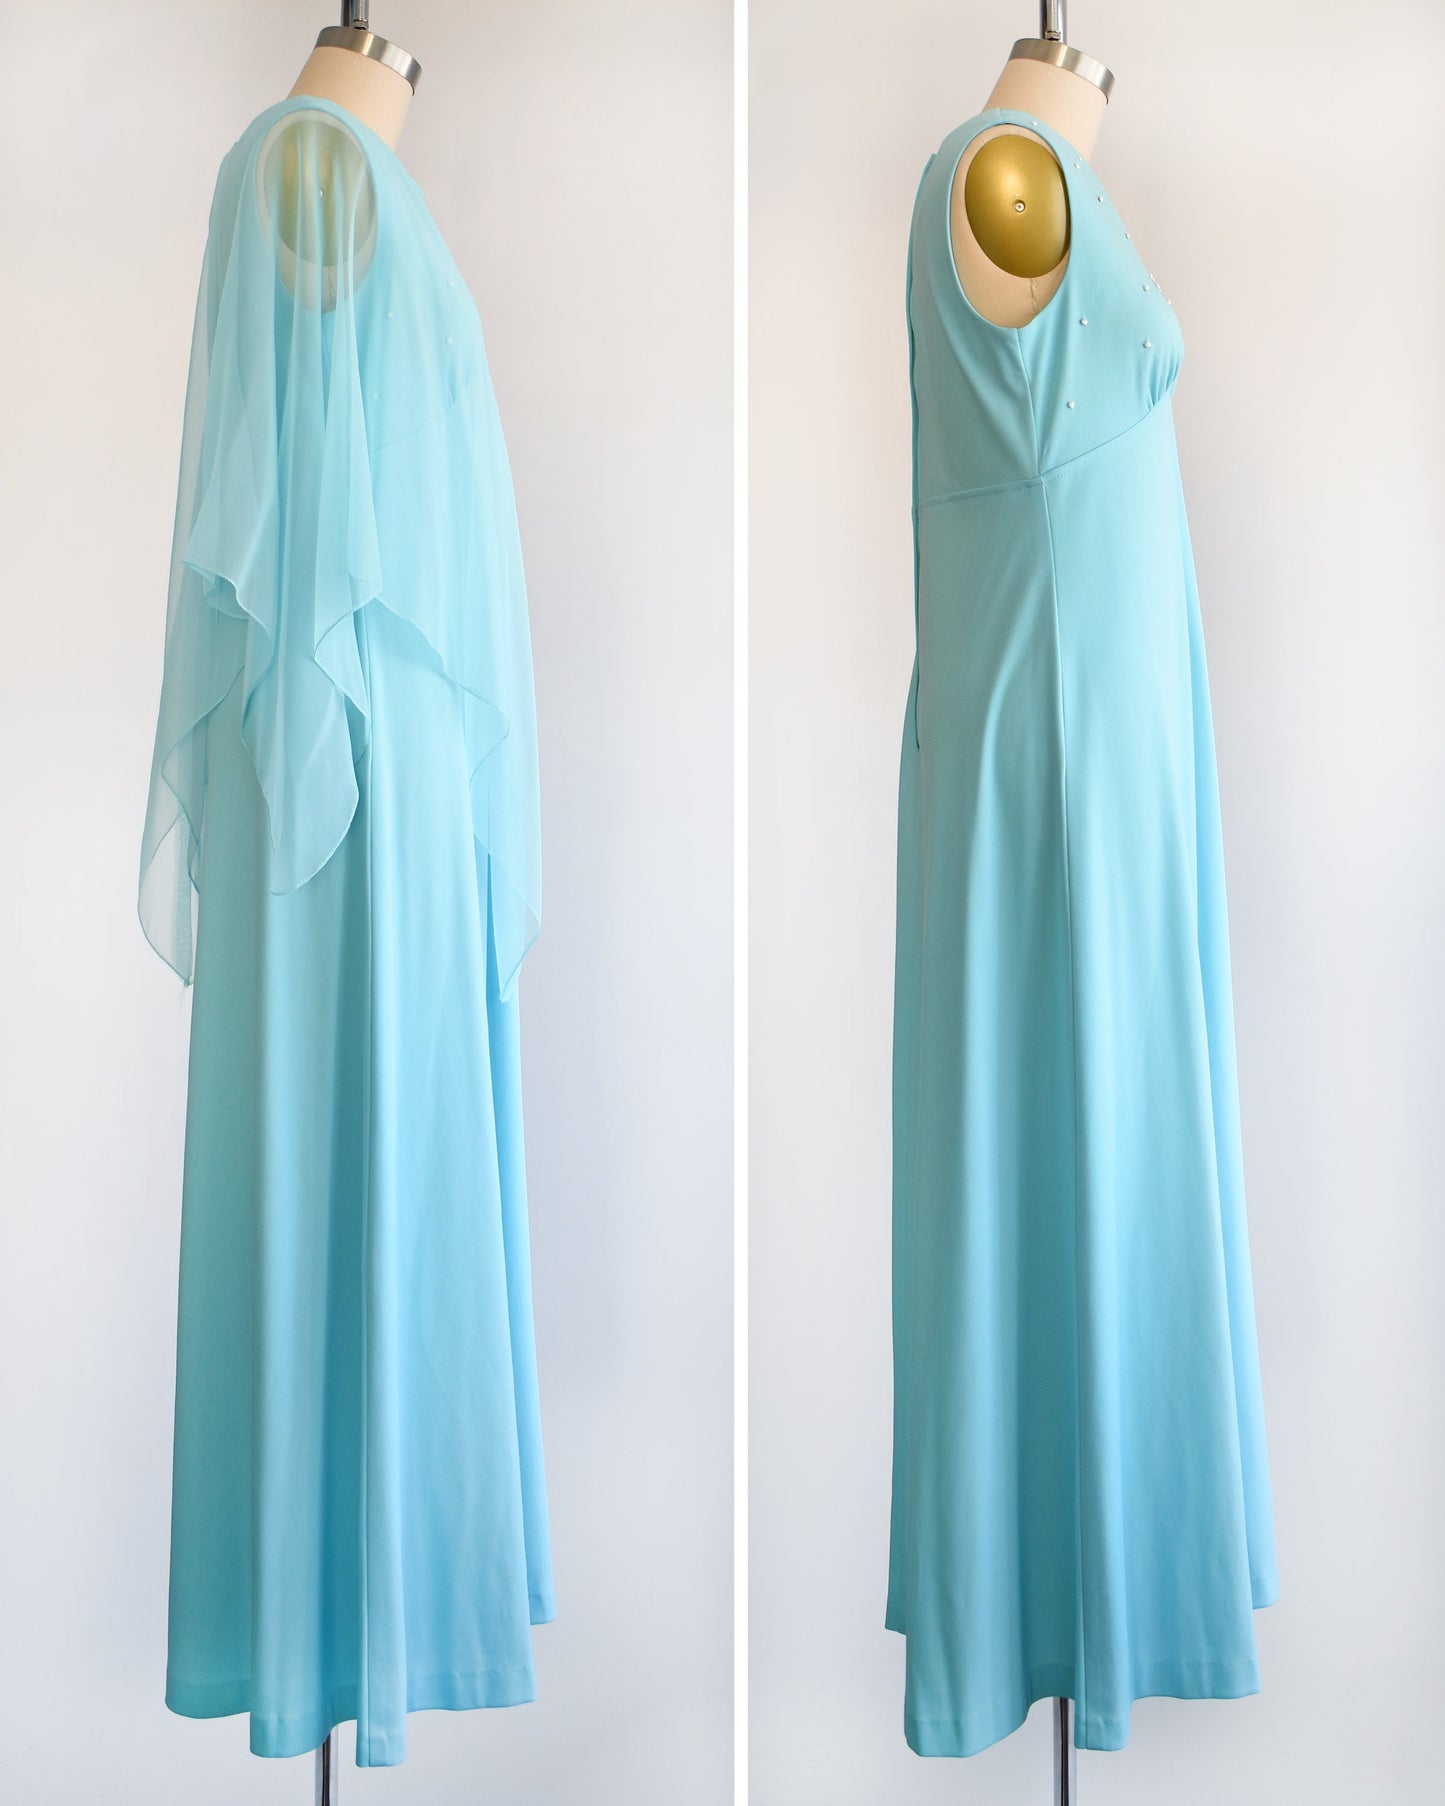 Side views of a vintage 70s blue maxi dress with matching semi-sheer blue cape overlay. The right photo shows the dress without the cape. The dress is on a dress form.